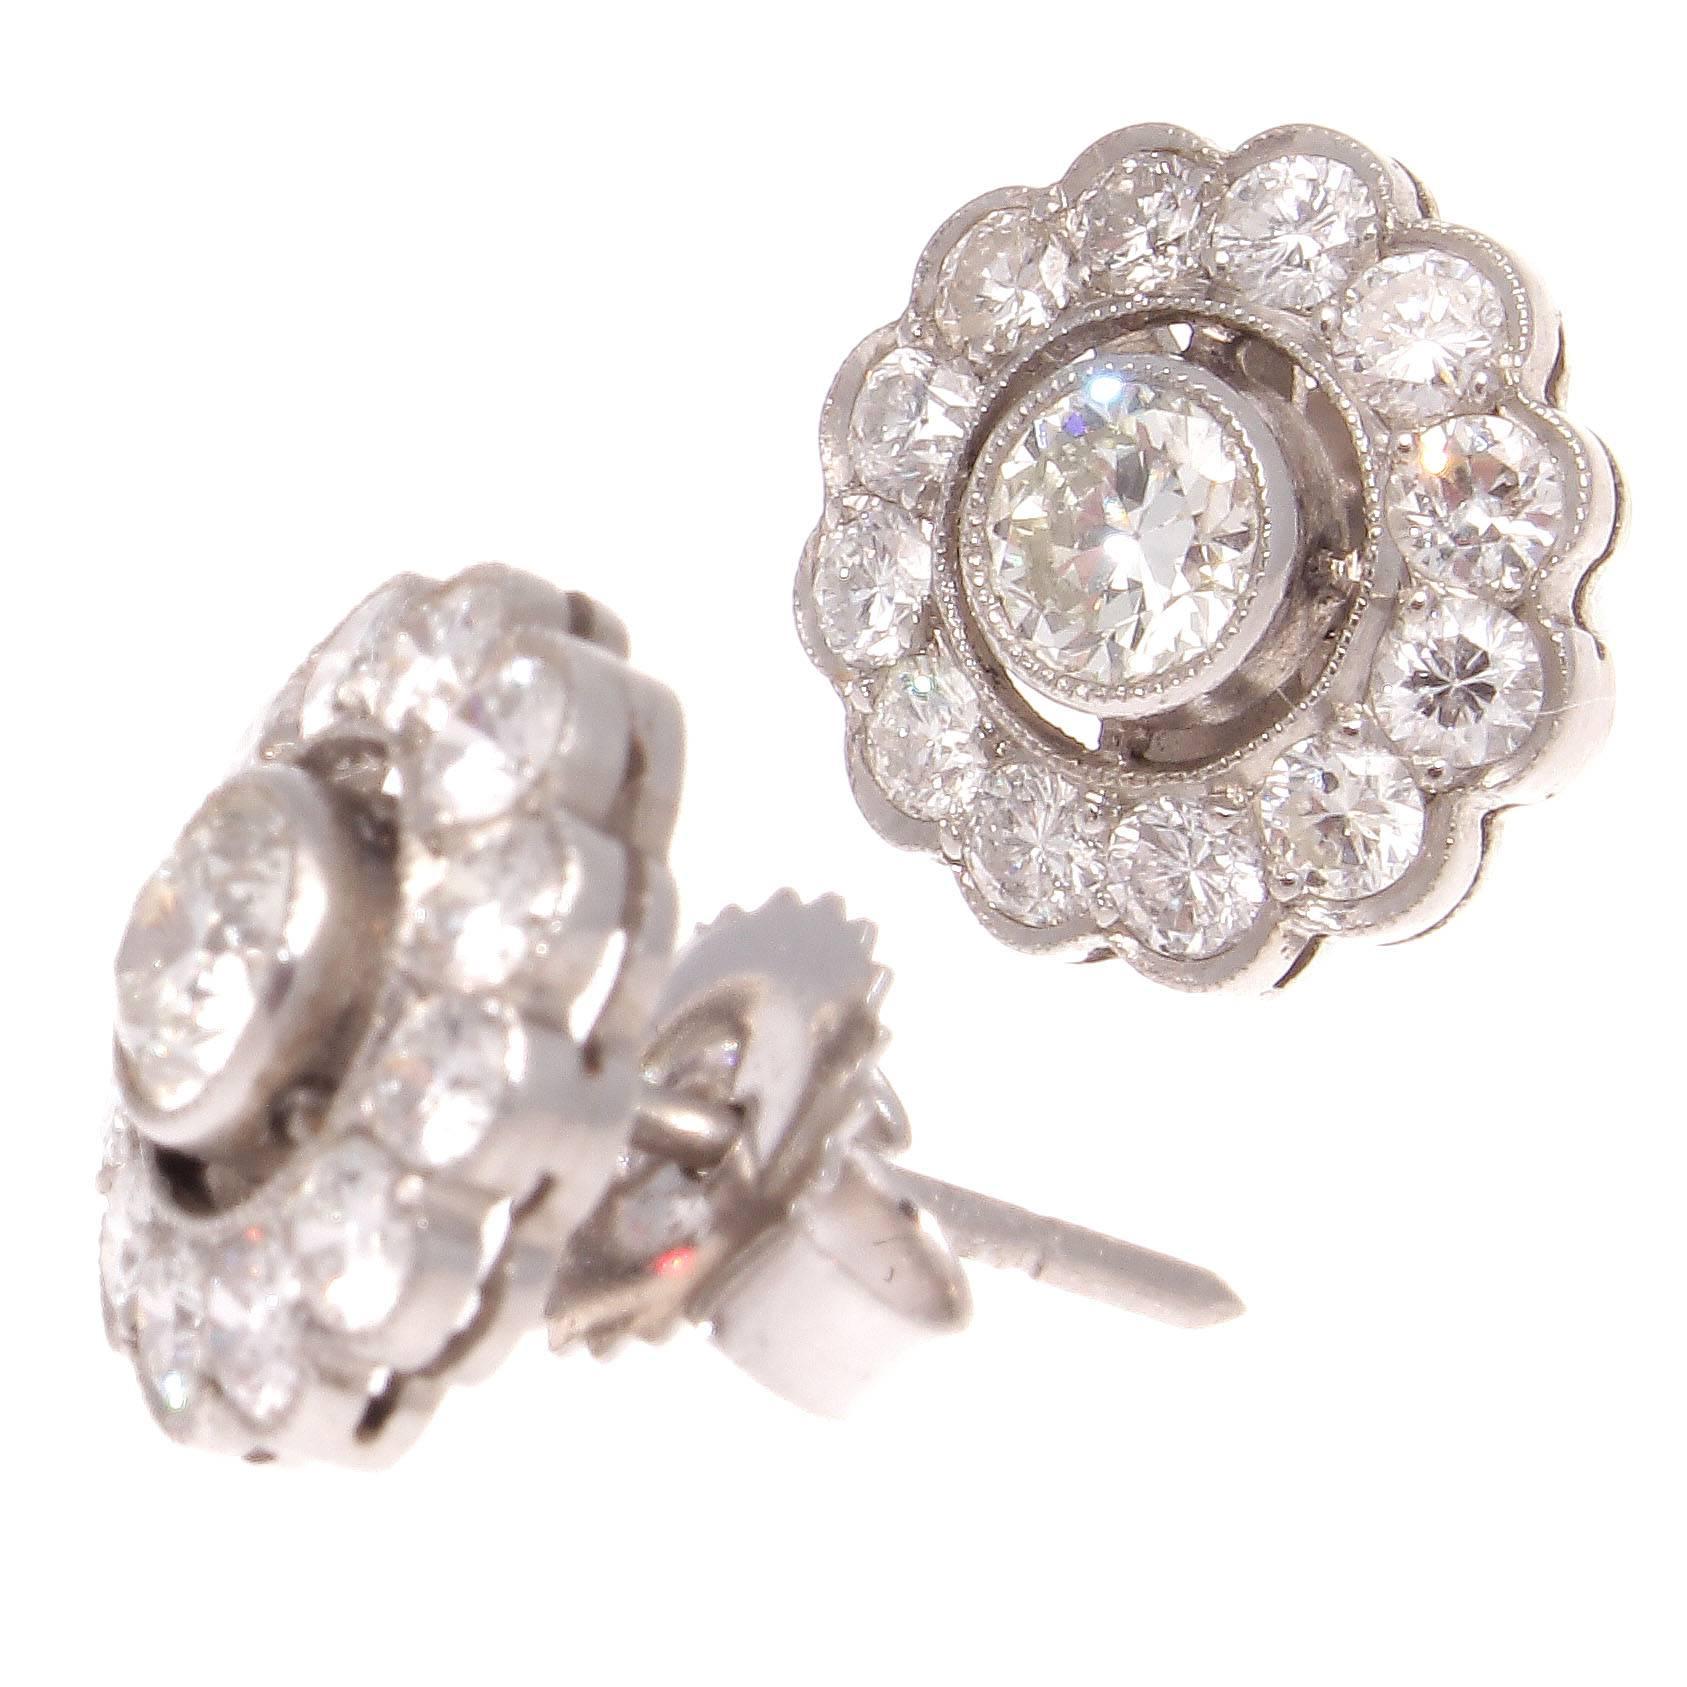 The classic diamond cluster earrings that always wears well and elegantly enhances the ear. Featuring 12 round white, diamonds surrounded the center round white diamond. Sparkle and scintillation in each. Crafted in platinum. 